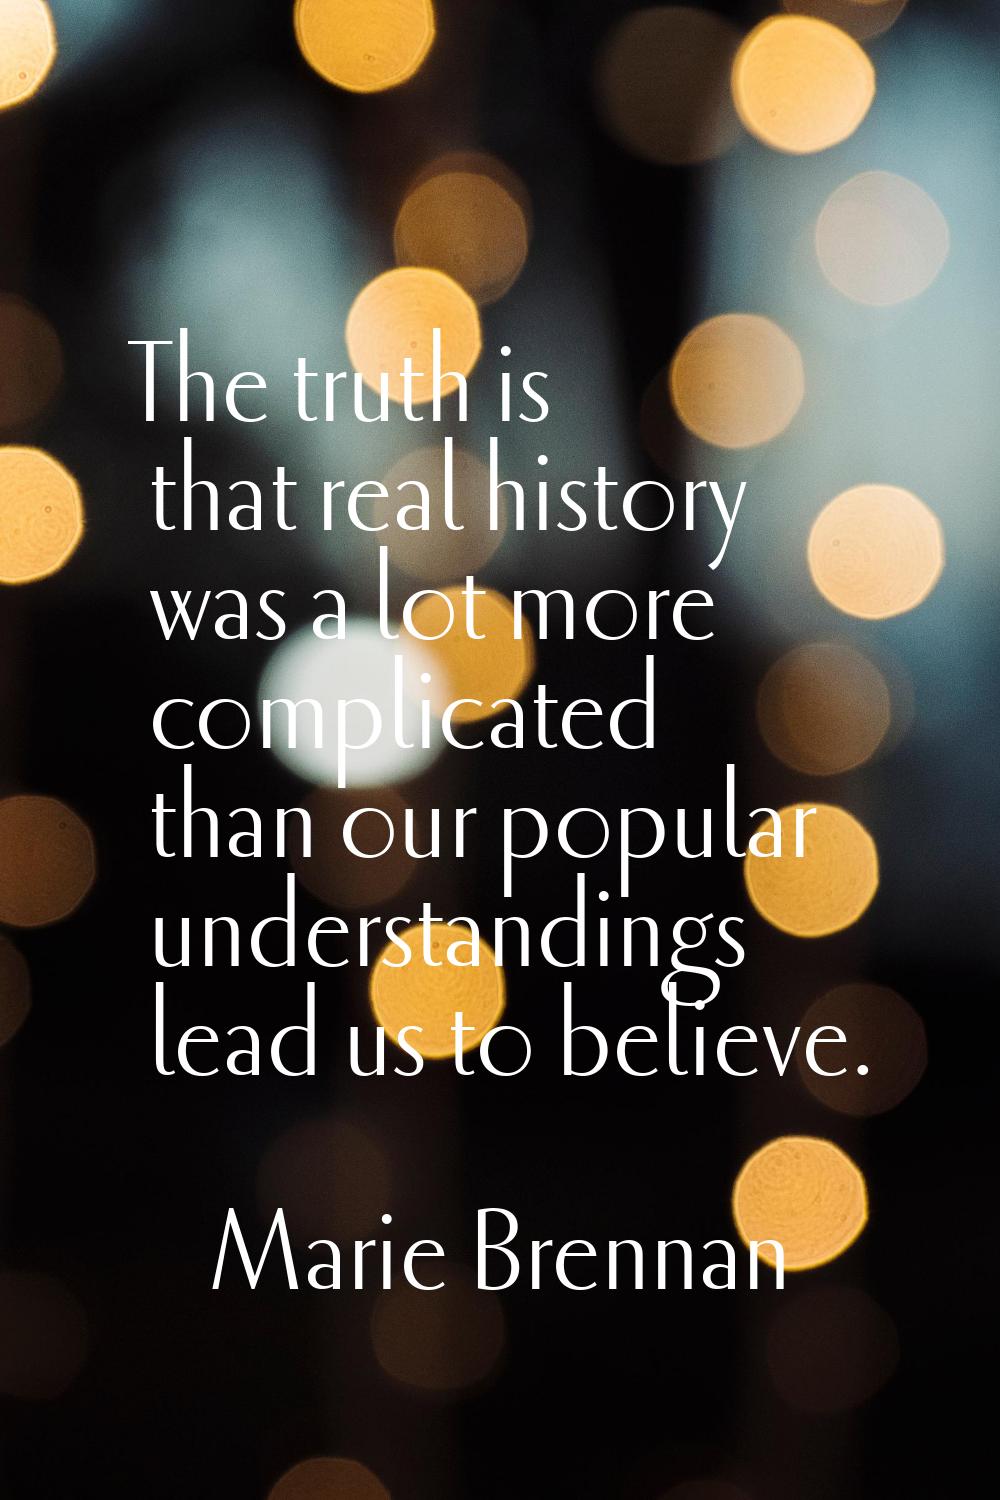 The truth is that real history was a lot more complicated than our popular understandings lead us t